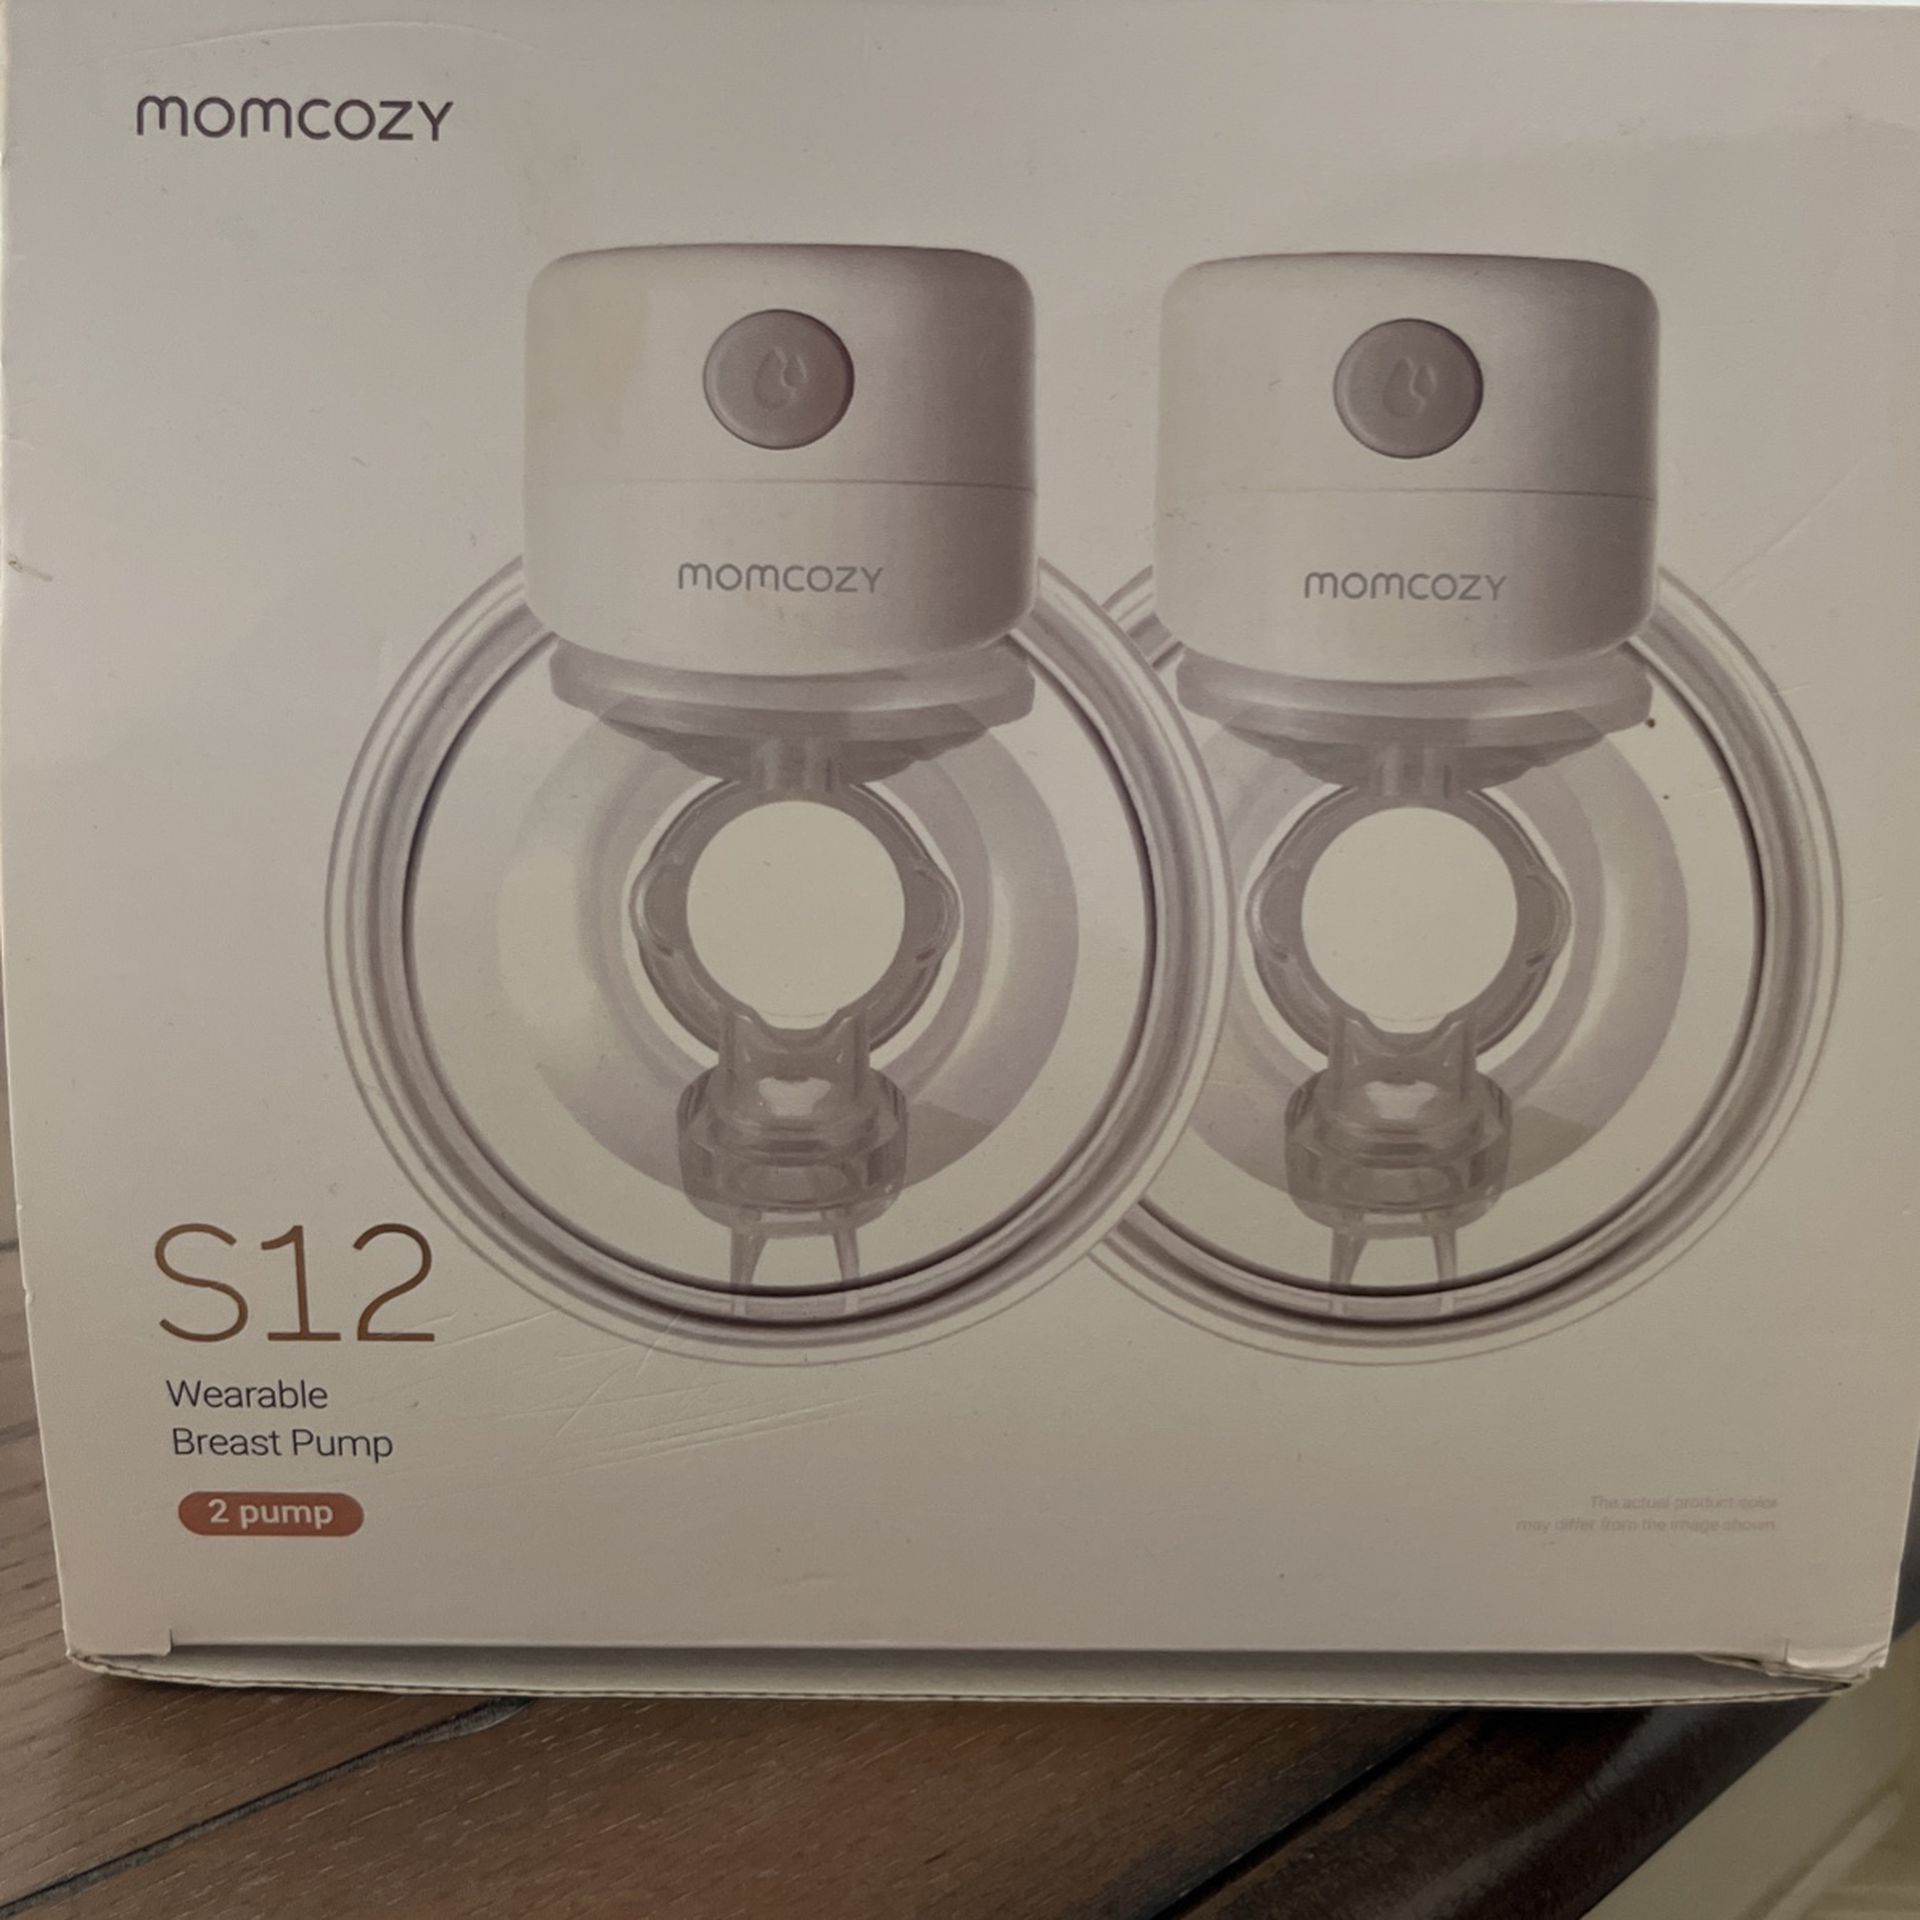 Momcozy S12 Wearable Breast Pump for Sale in The Bronx, NY - OfferUp